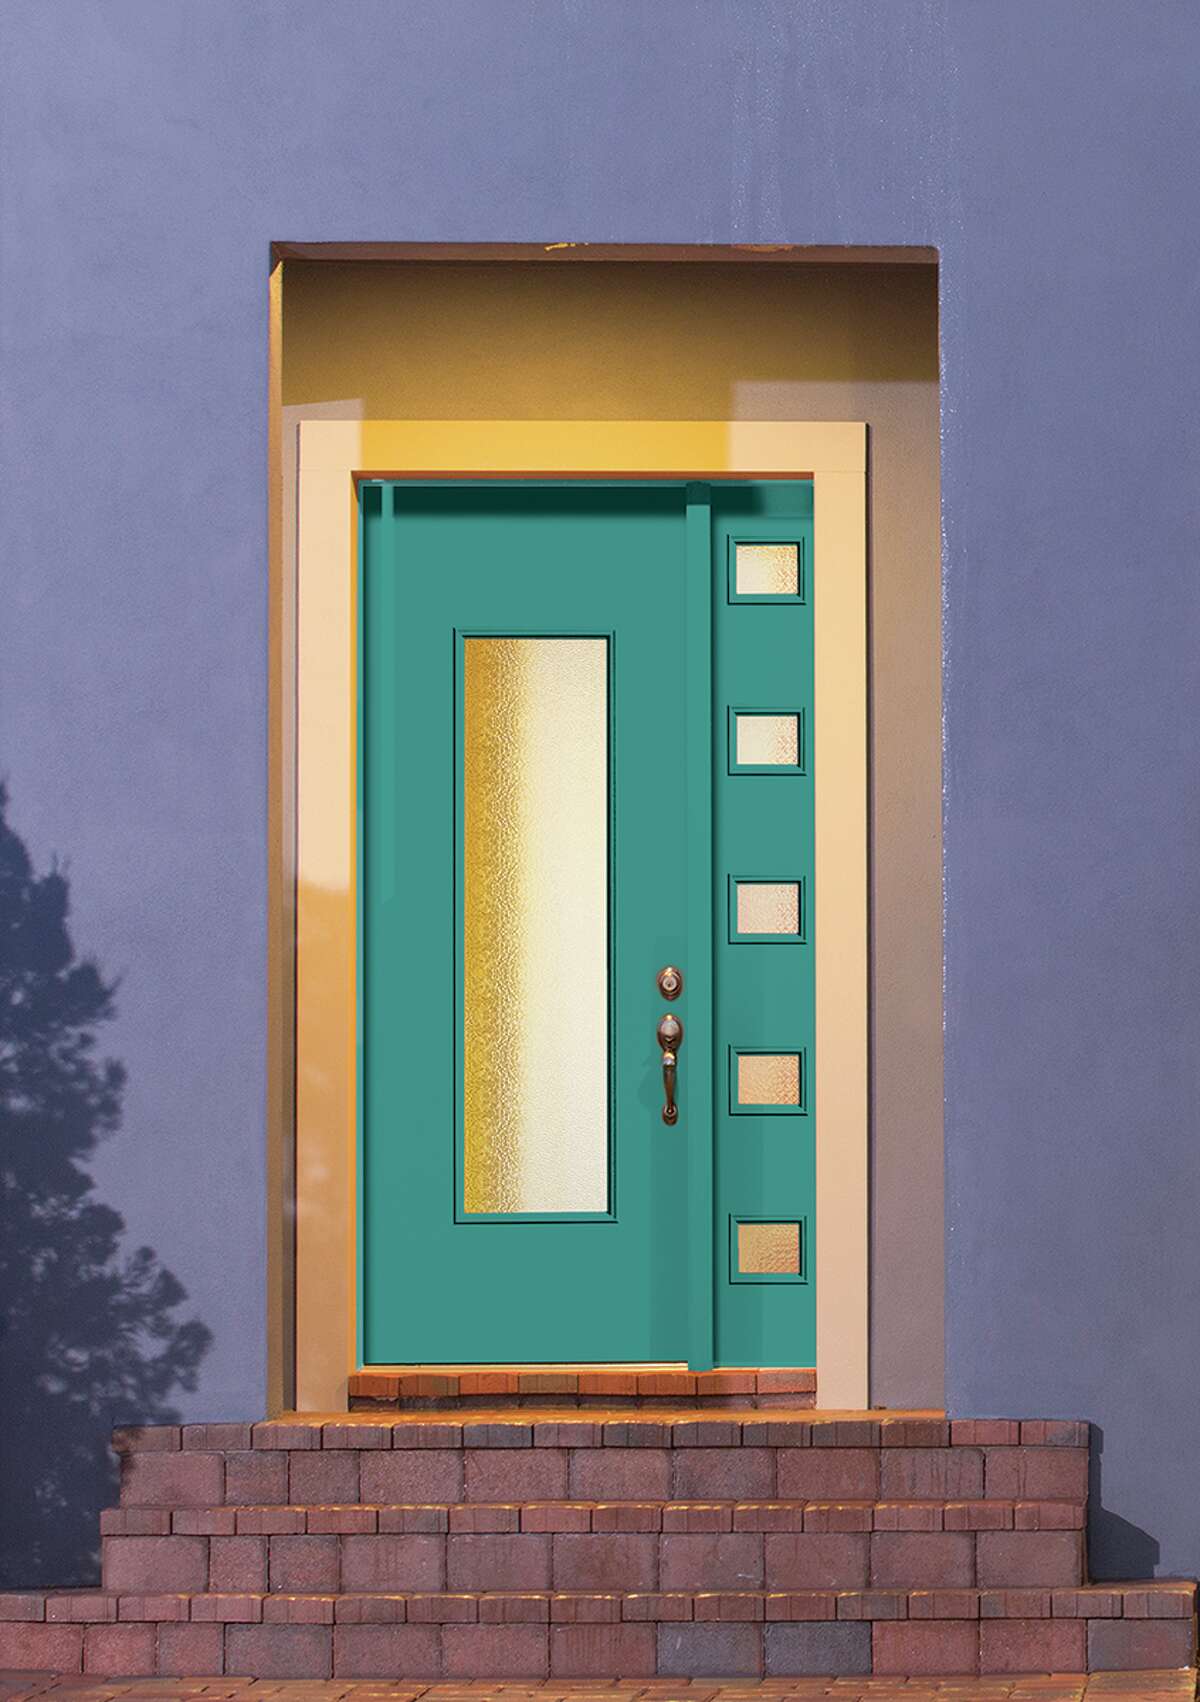 The front door is a place to get bold with exterior color. This Therma-Tru door is a deep turquoise, which color expert Kate Smith named a 2015 front-door trend color.